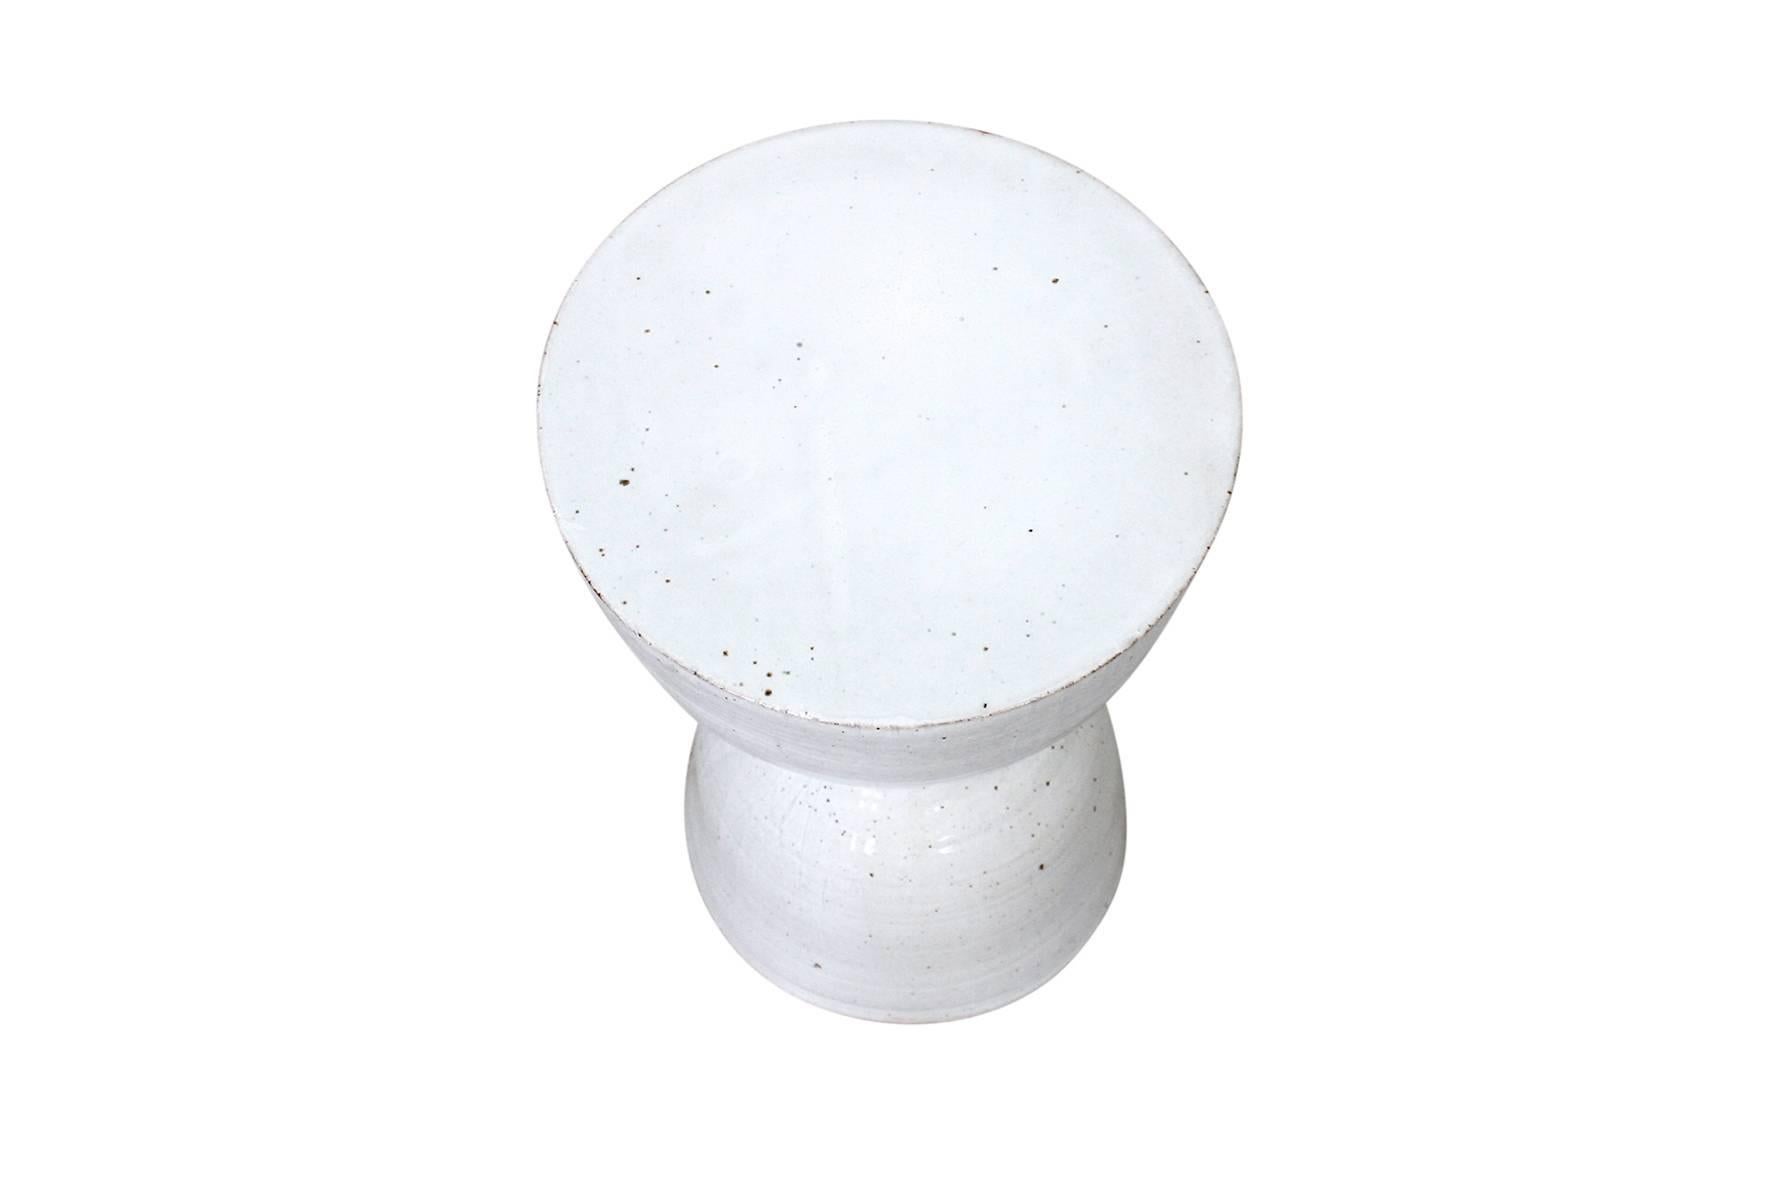 Large Tariki Ceramic Stool In Excellent Condition For Sale In Waltham, MA